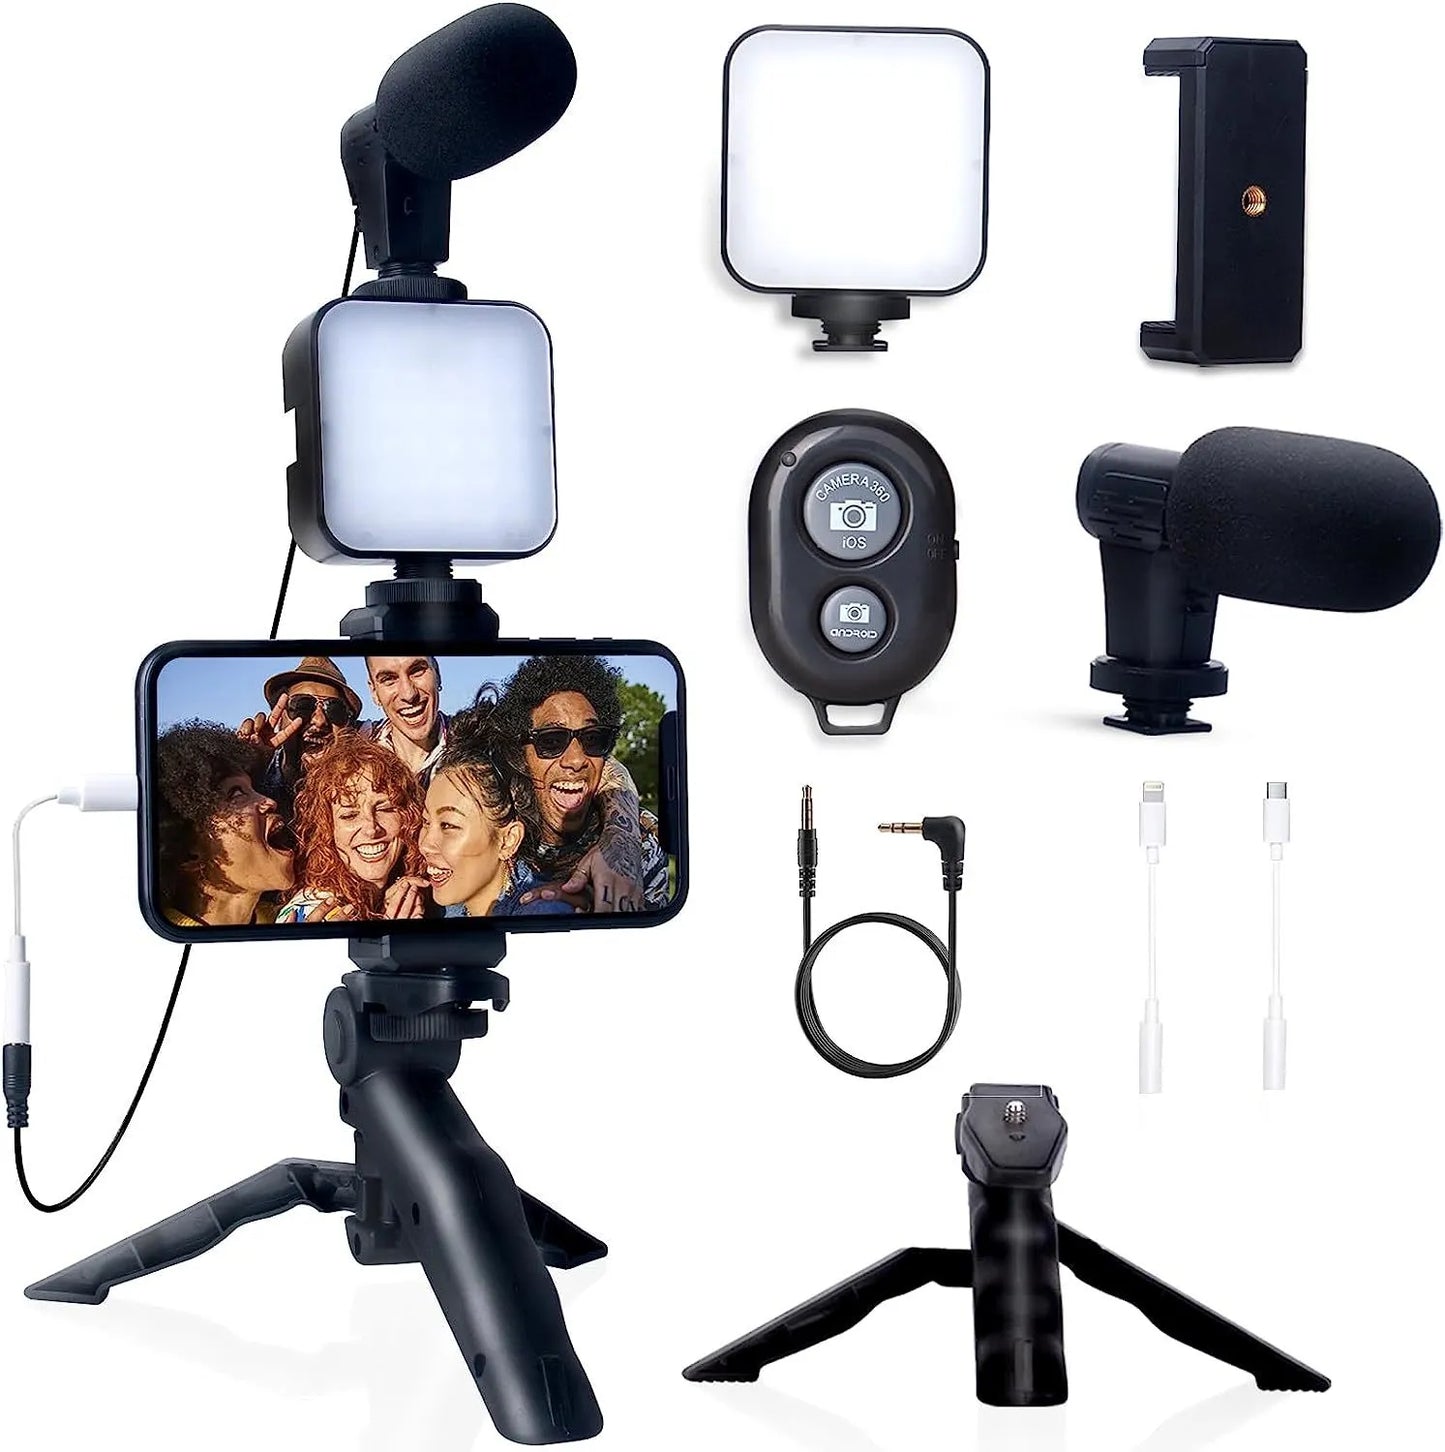 Content Creator Starter Kit, Vlogging for Beginners - Tripod, Microphone and Lighting Streaming Accessories